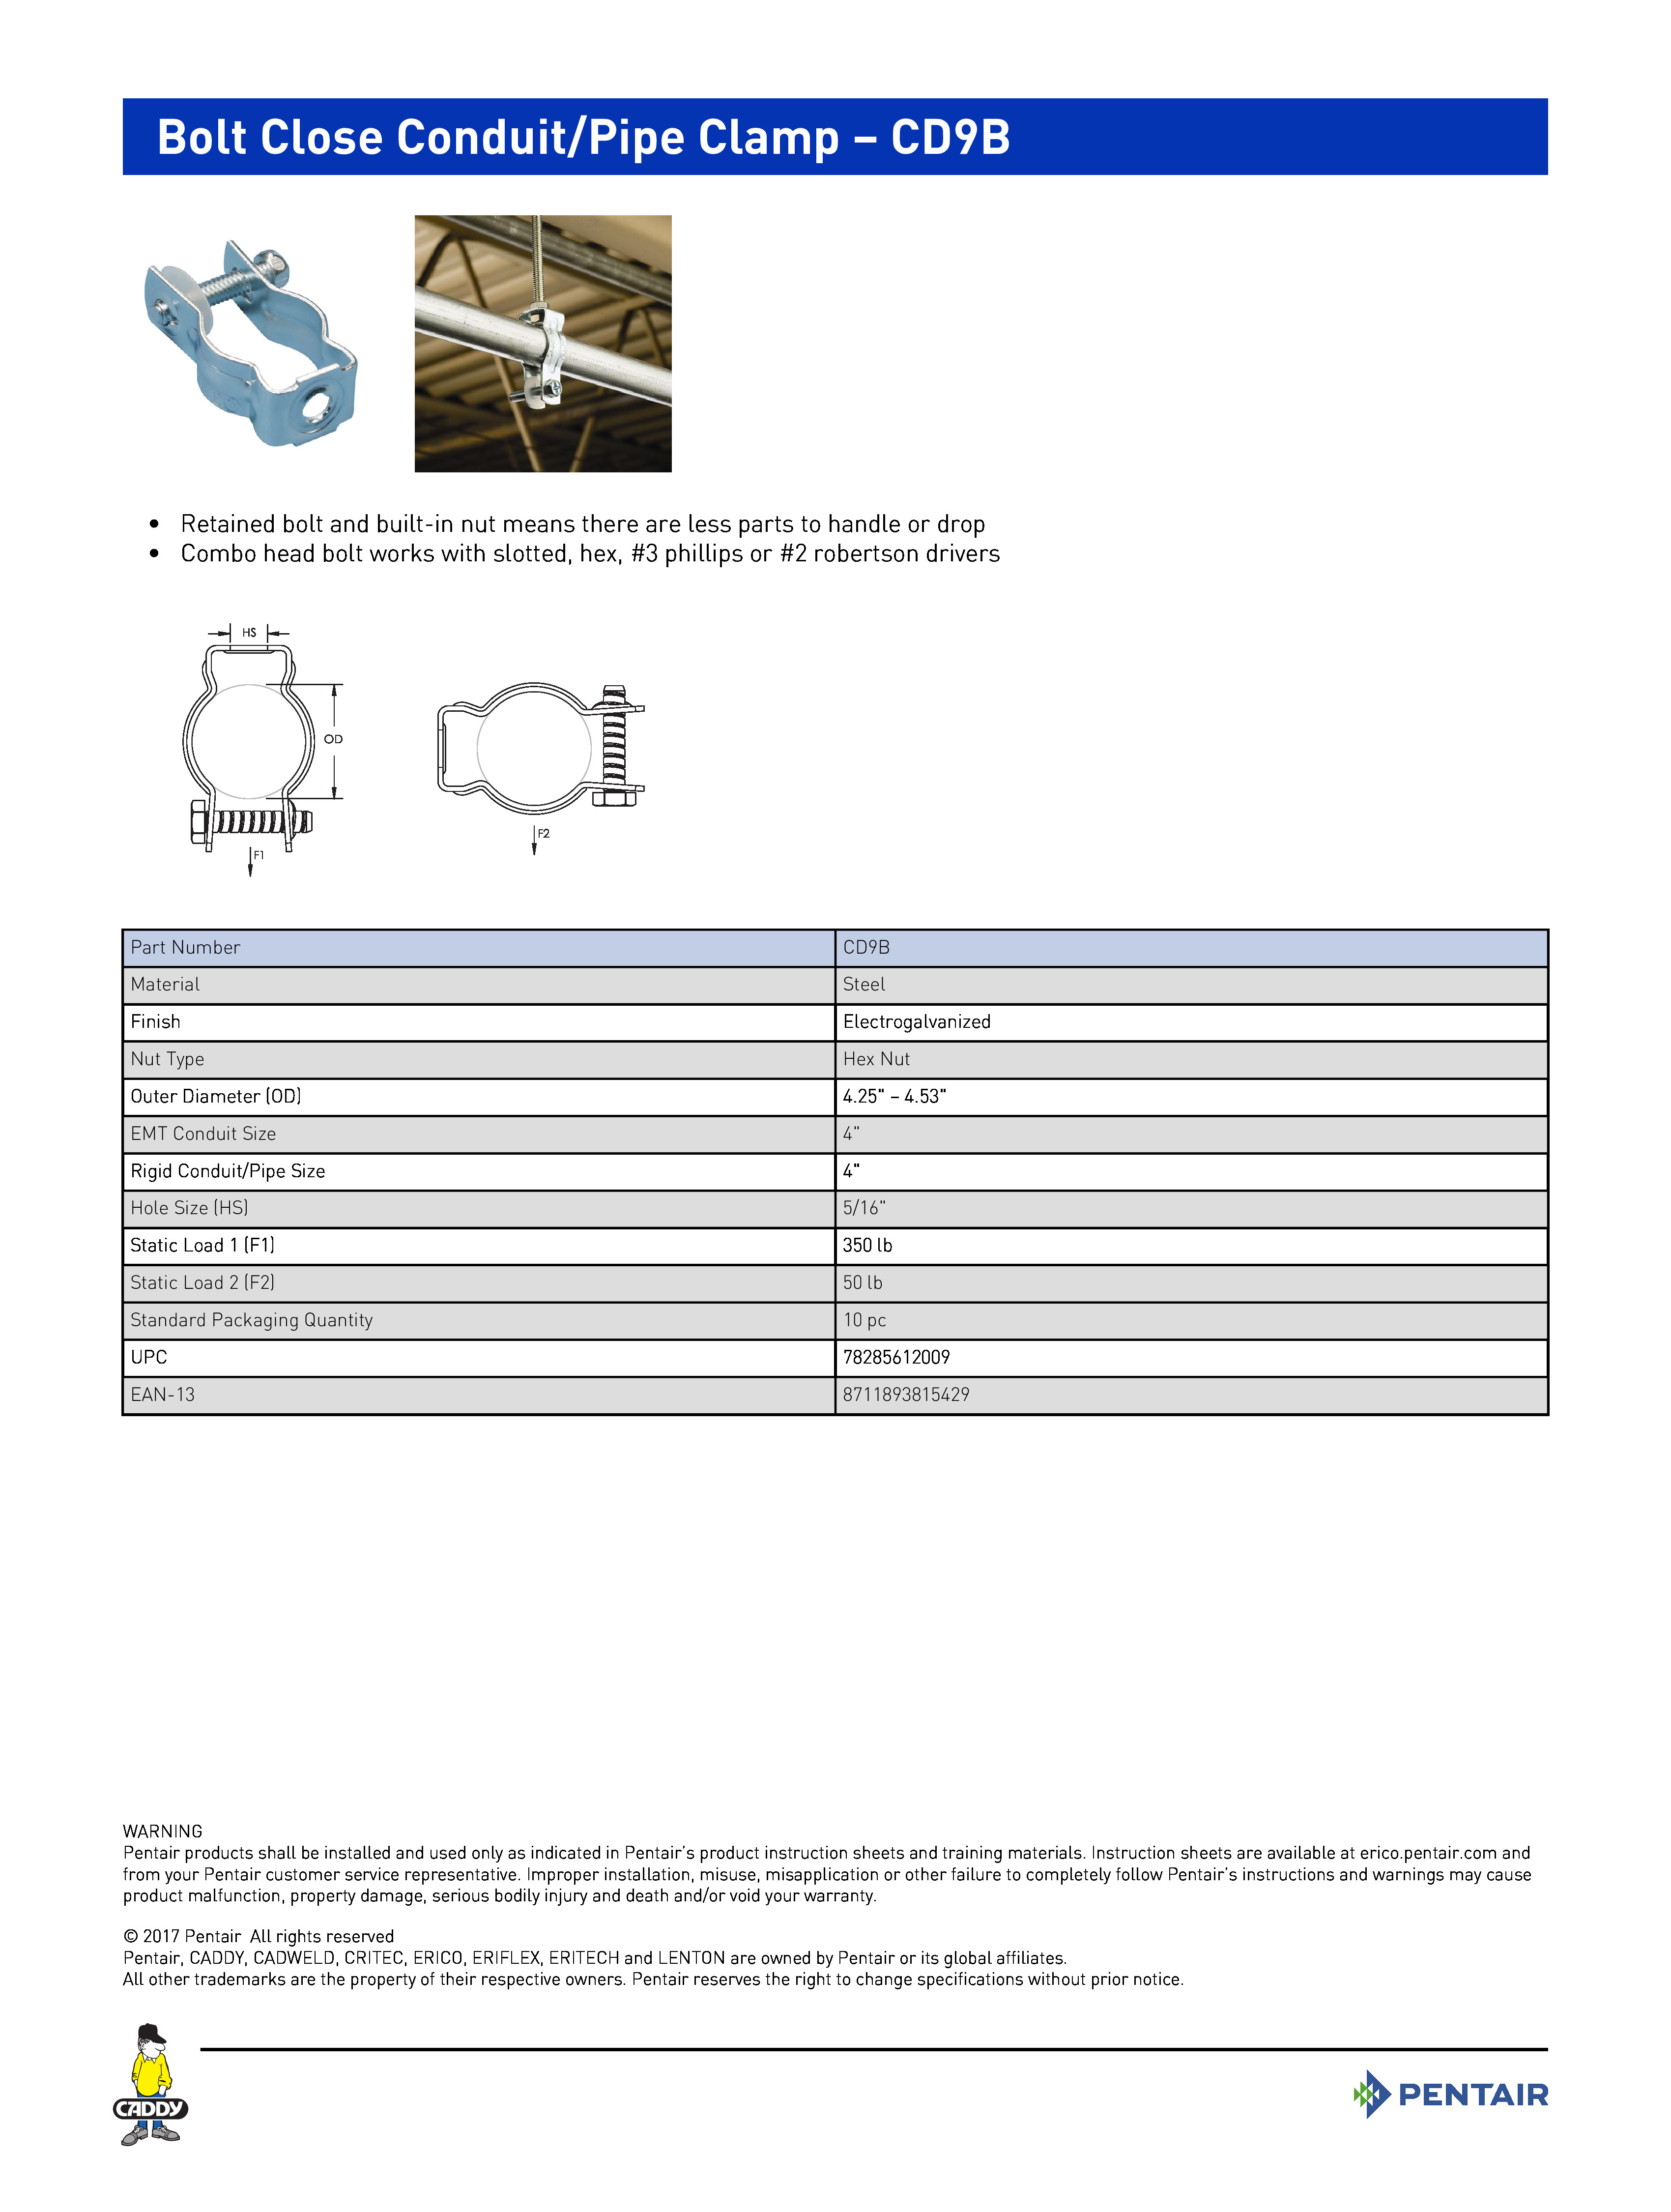 Bolt Close Conduit/Pipe Clamp – CD9B	
 	
•	Retained bolt and built-in nut means there are less parts to handle or drop	
•	Combo head bolt works with slotted, hex, #3 phillips or #2 robertson drivers	
 	
Part NumberCD9BMaterialSteelFinishElectrogalvanizedNut TypeHex NutOuter Diameter (OD)4.25" – 4.53"EMT Conduit Size4"Rigid Conduit/Pipe Size4"Hole Size (HS)5/16"Static Load 1 (F1)350 lbStatic Load 2 (F2)50 lbStandard Packaging Quantity10 pcUPC78285612009EAN-138711893815429
WARNINGPentair products shall be installed and used only as indicated in Pentair’s product instruction sheets and training materials. Instruction sheets are available at erico.pentair.com andfrom your Pentair customer service representative. Improper installation, misuse, misapplication or other failure to completely follow Pentair’s instructions and warnings may causeproduct malfunction, property damage, serious bodily injury and death and/or void your warranty. 